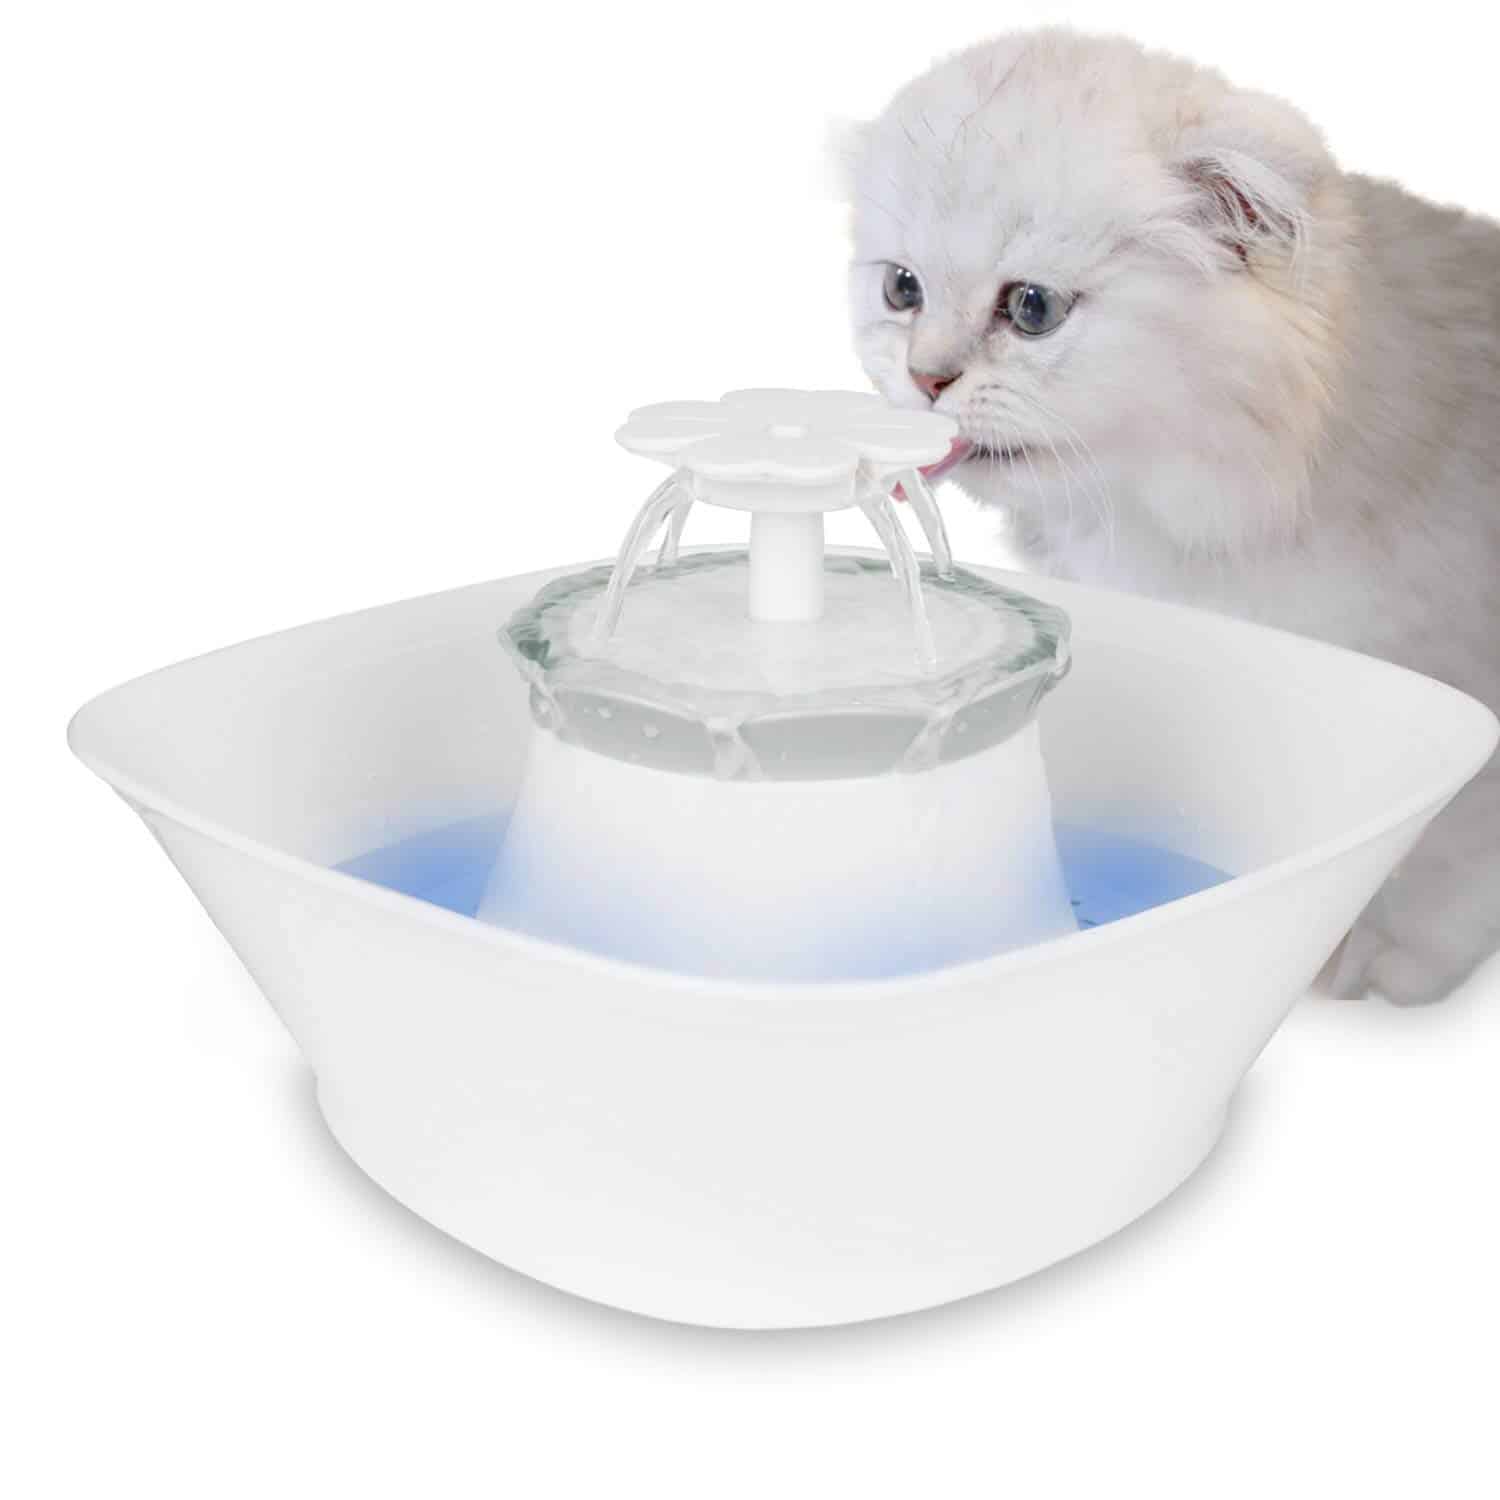 The Best 5 Quiet Cat Water Fountains in 2022 Raise a Cat